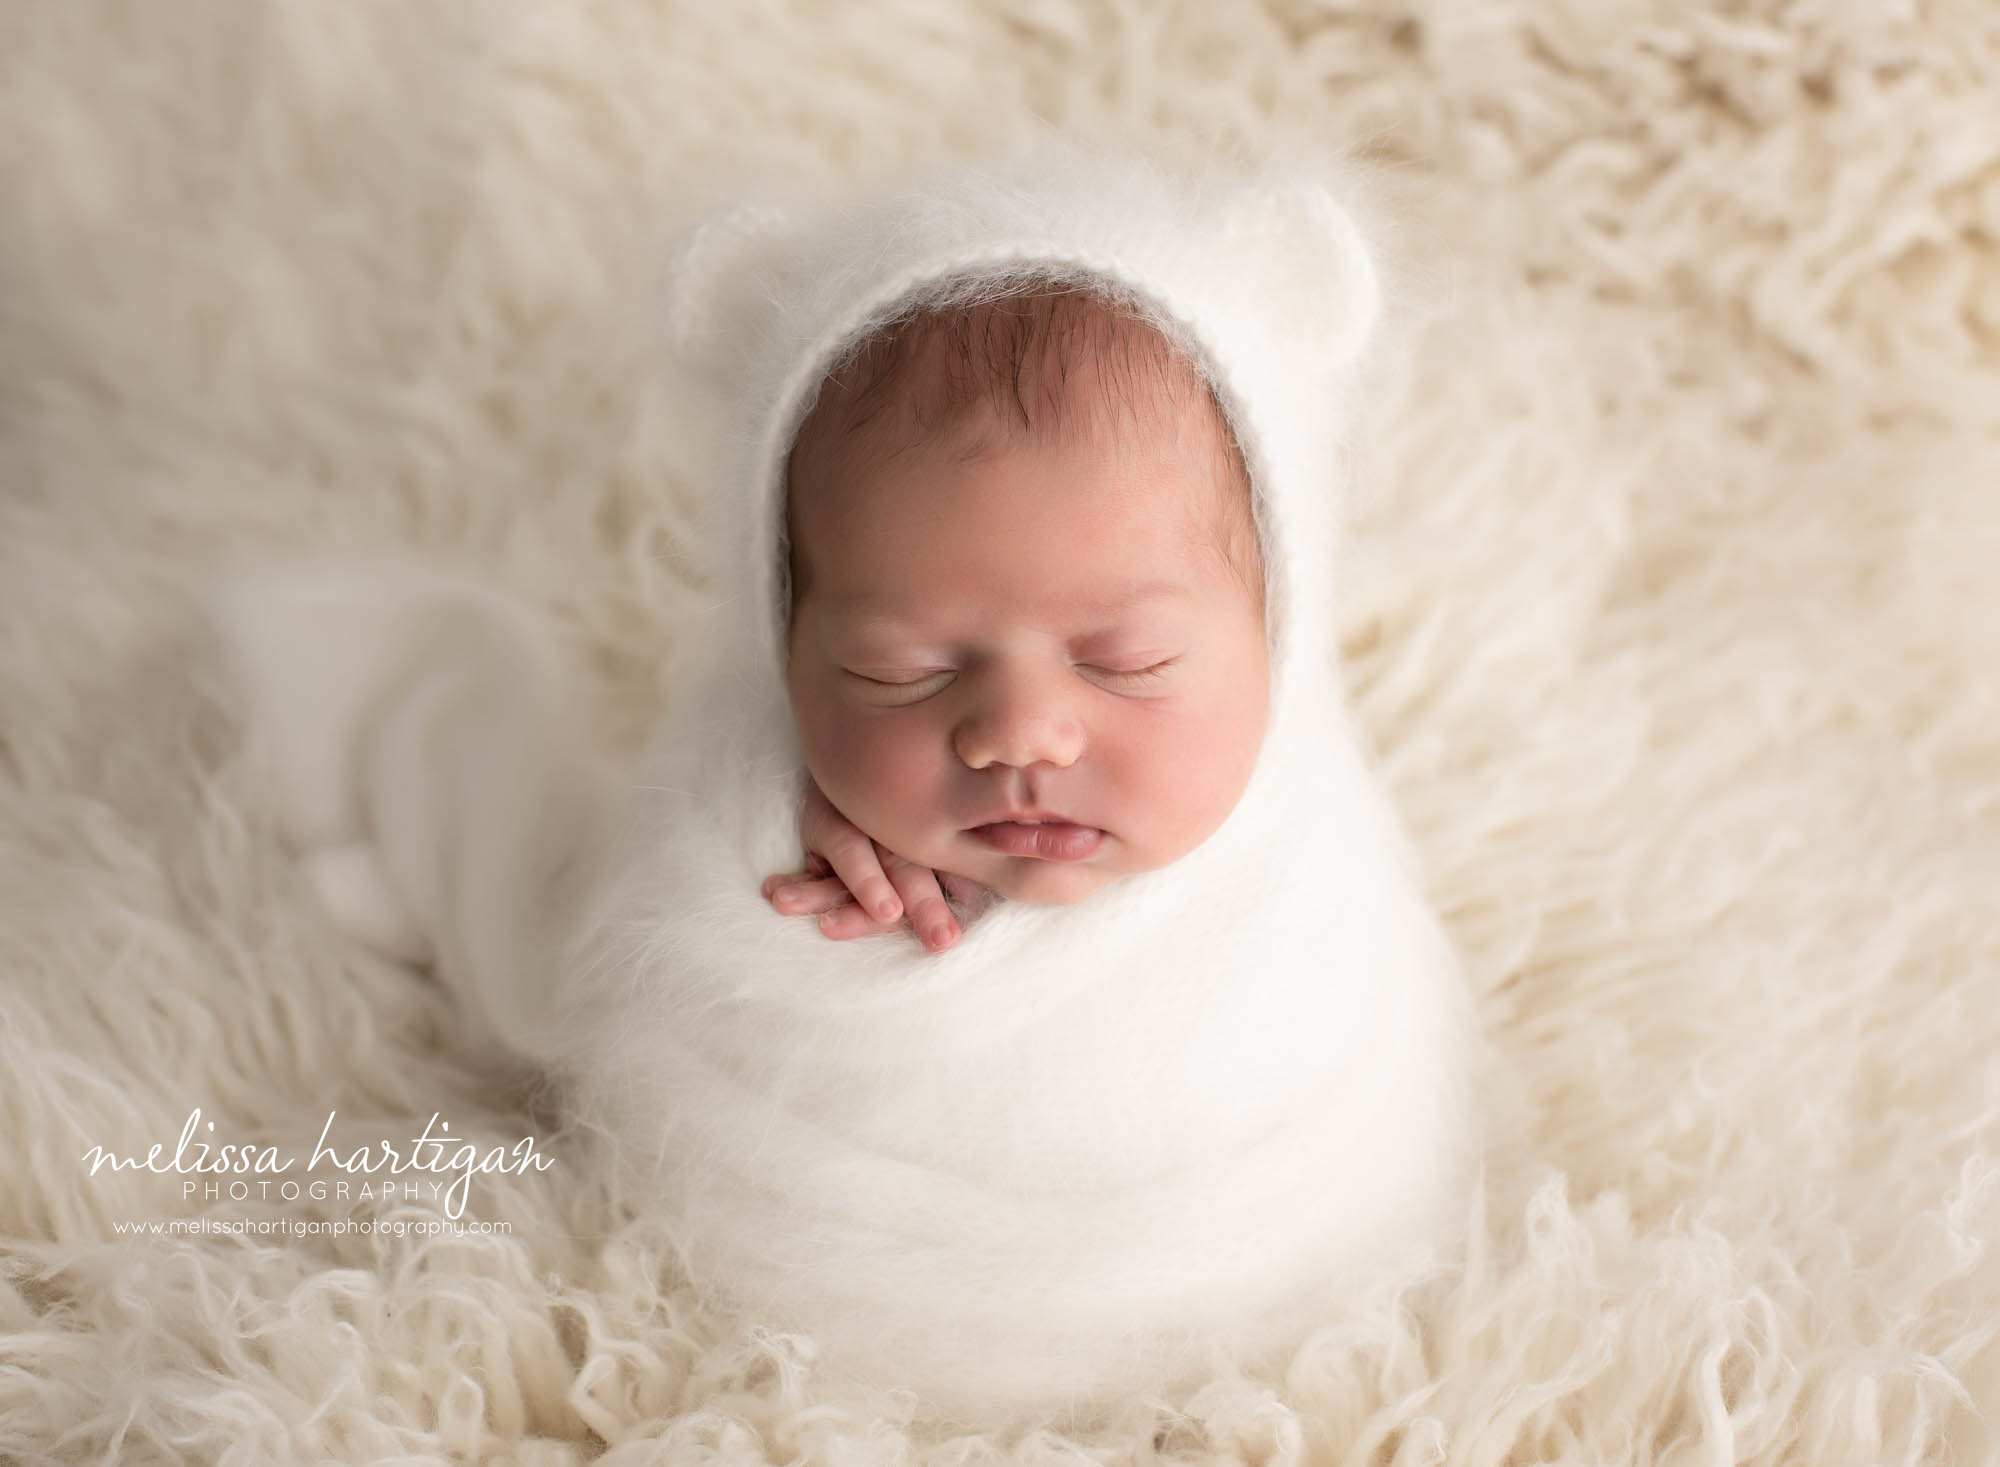 Newborn baby boy wrapped in white knitted wrap with matching angora knitted bear bonnet Stratford CT newborn Photography